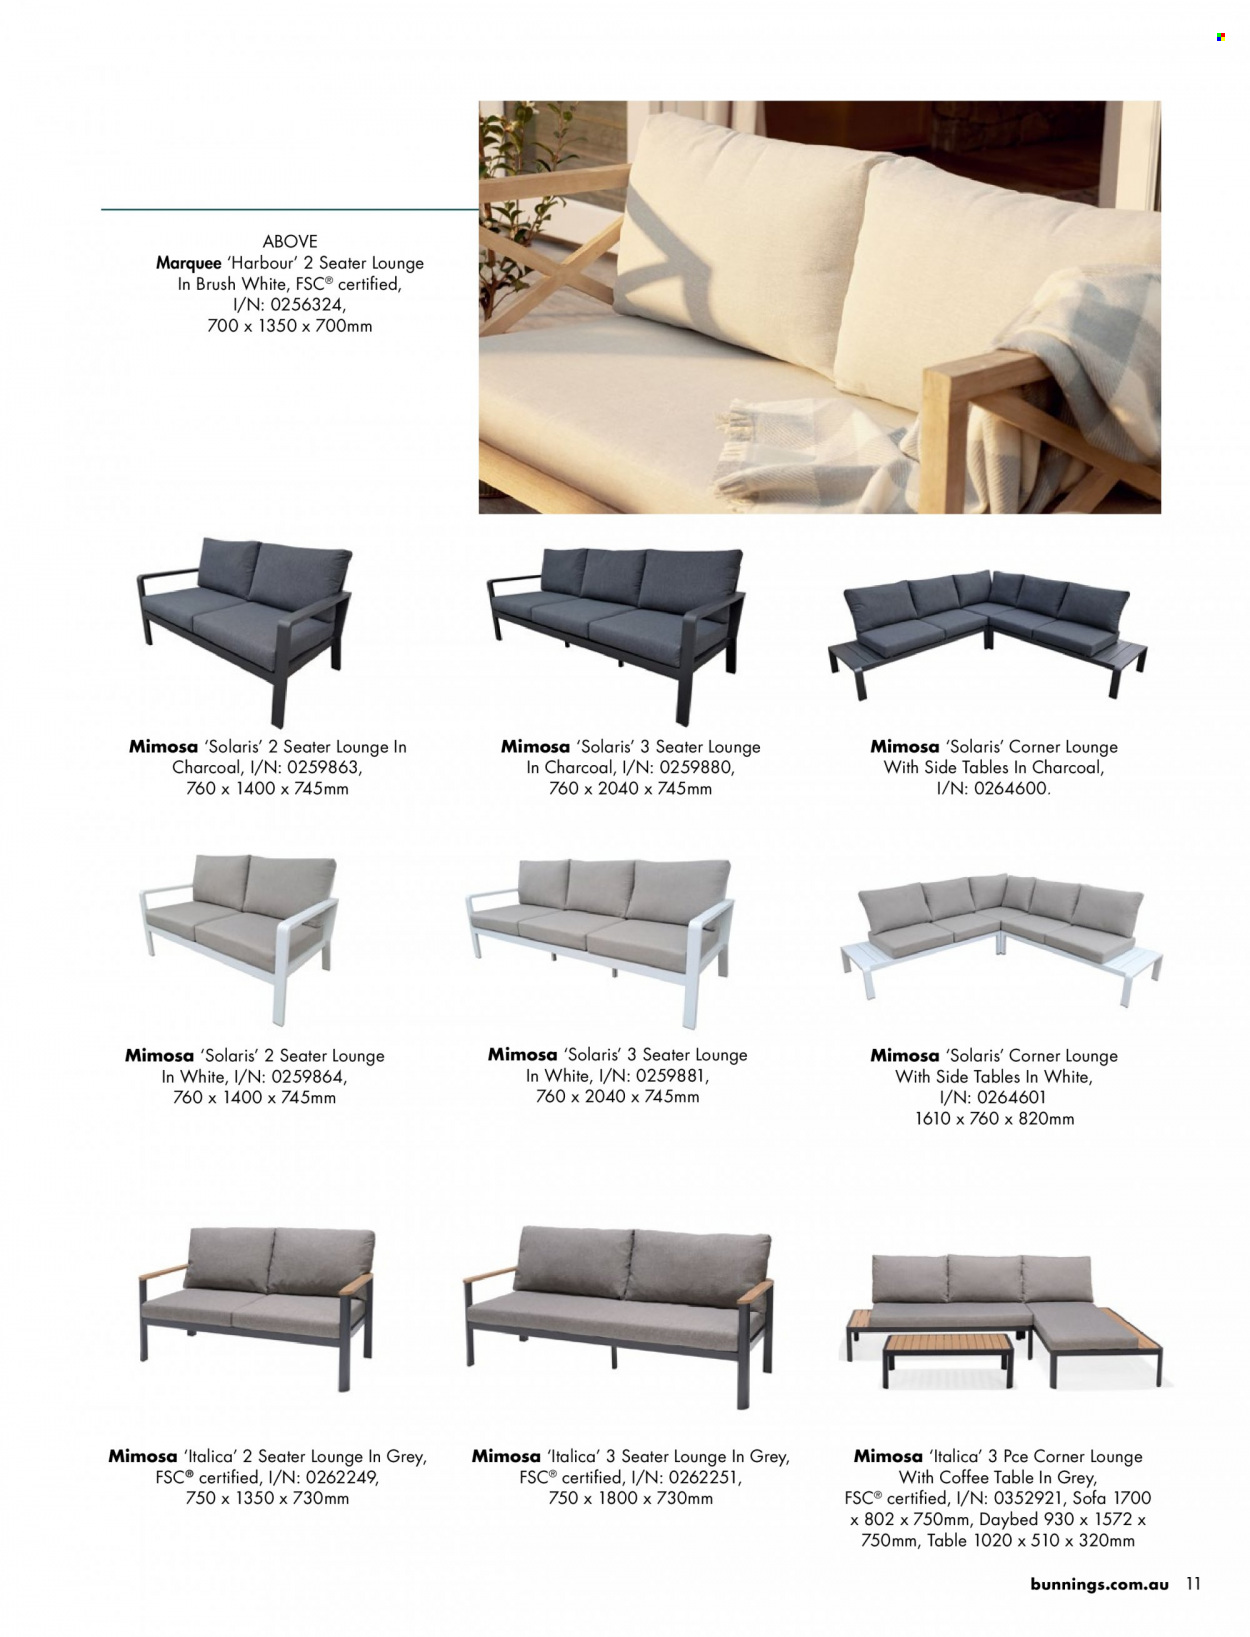 thumbnail - Bunnings Warehouse Catalogue - Sales products - table, sofa, lounge, coffee table, sidetable, daybed, brush. Page 11.